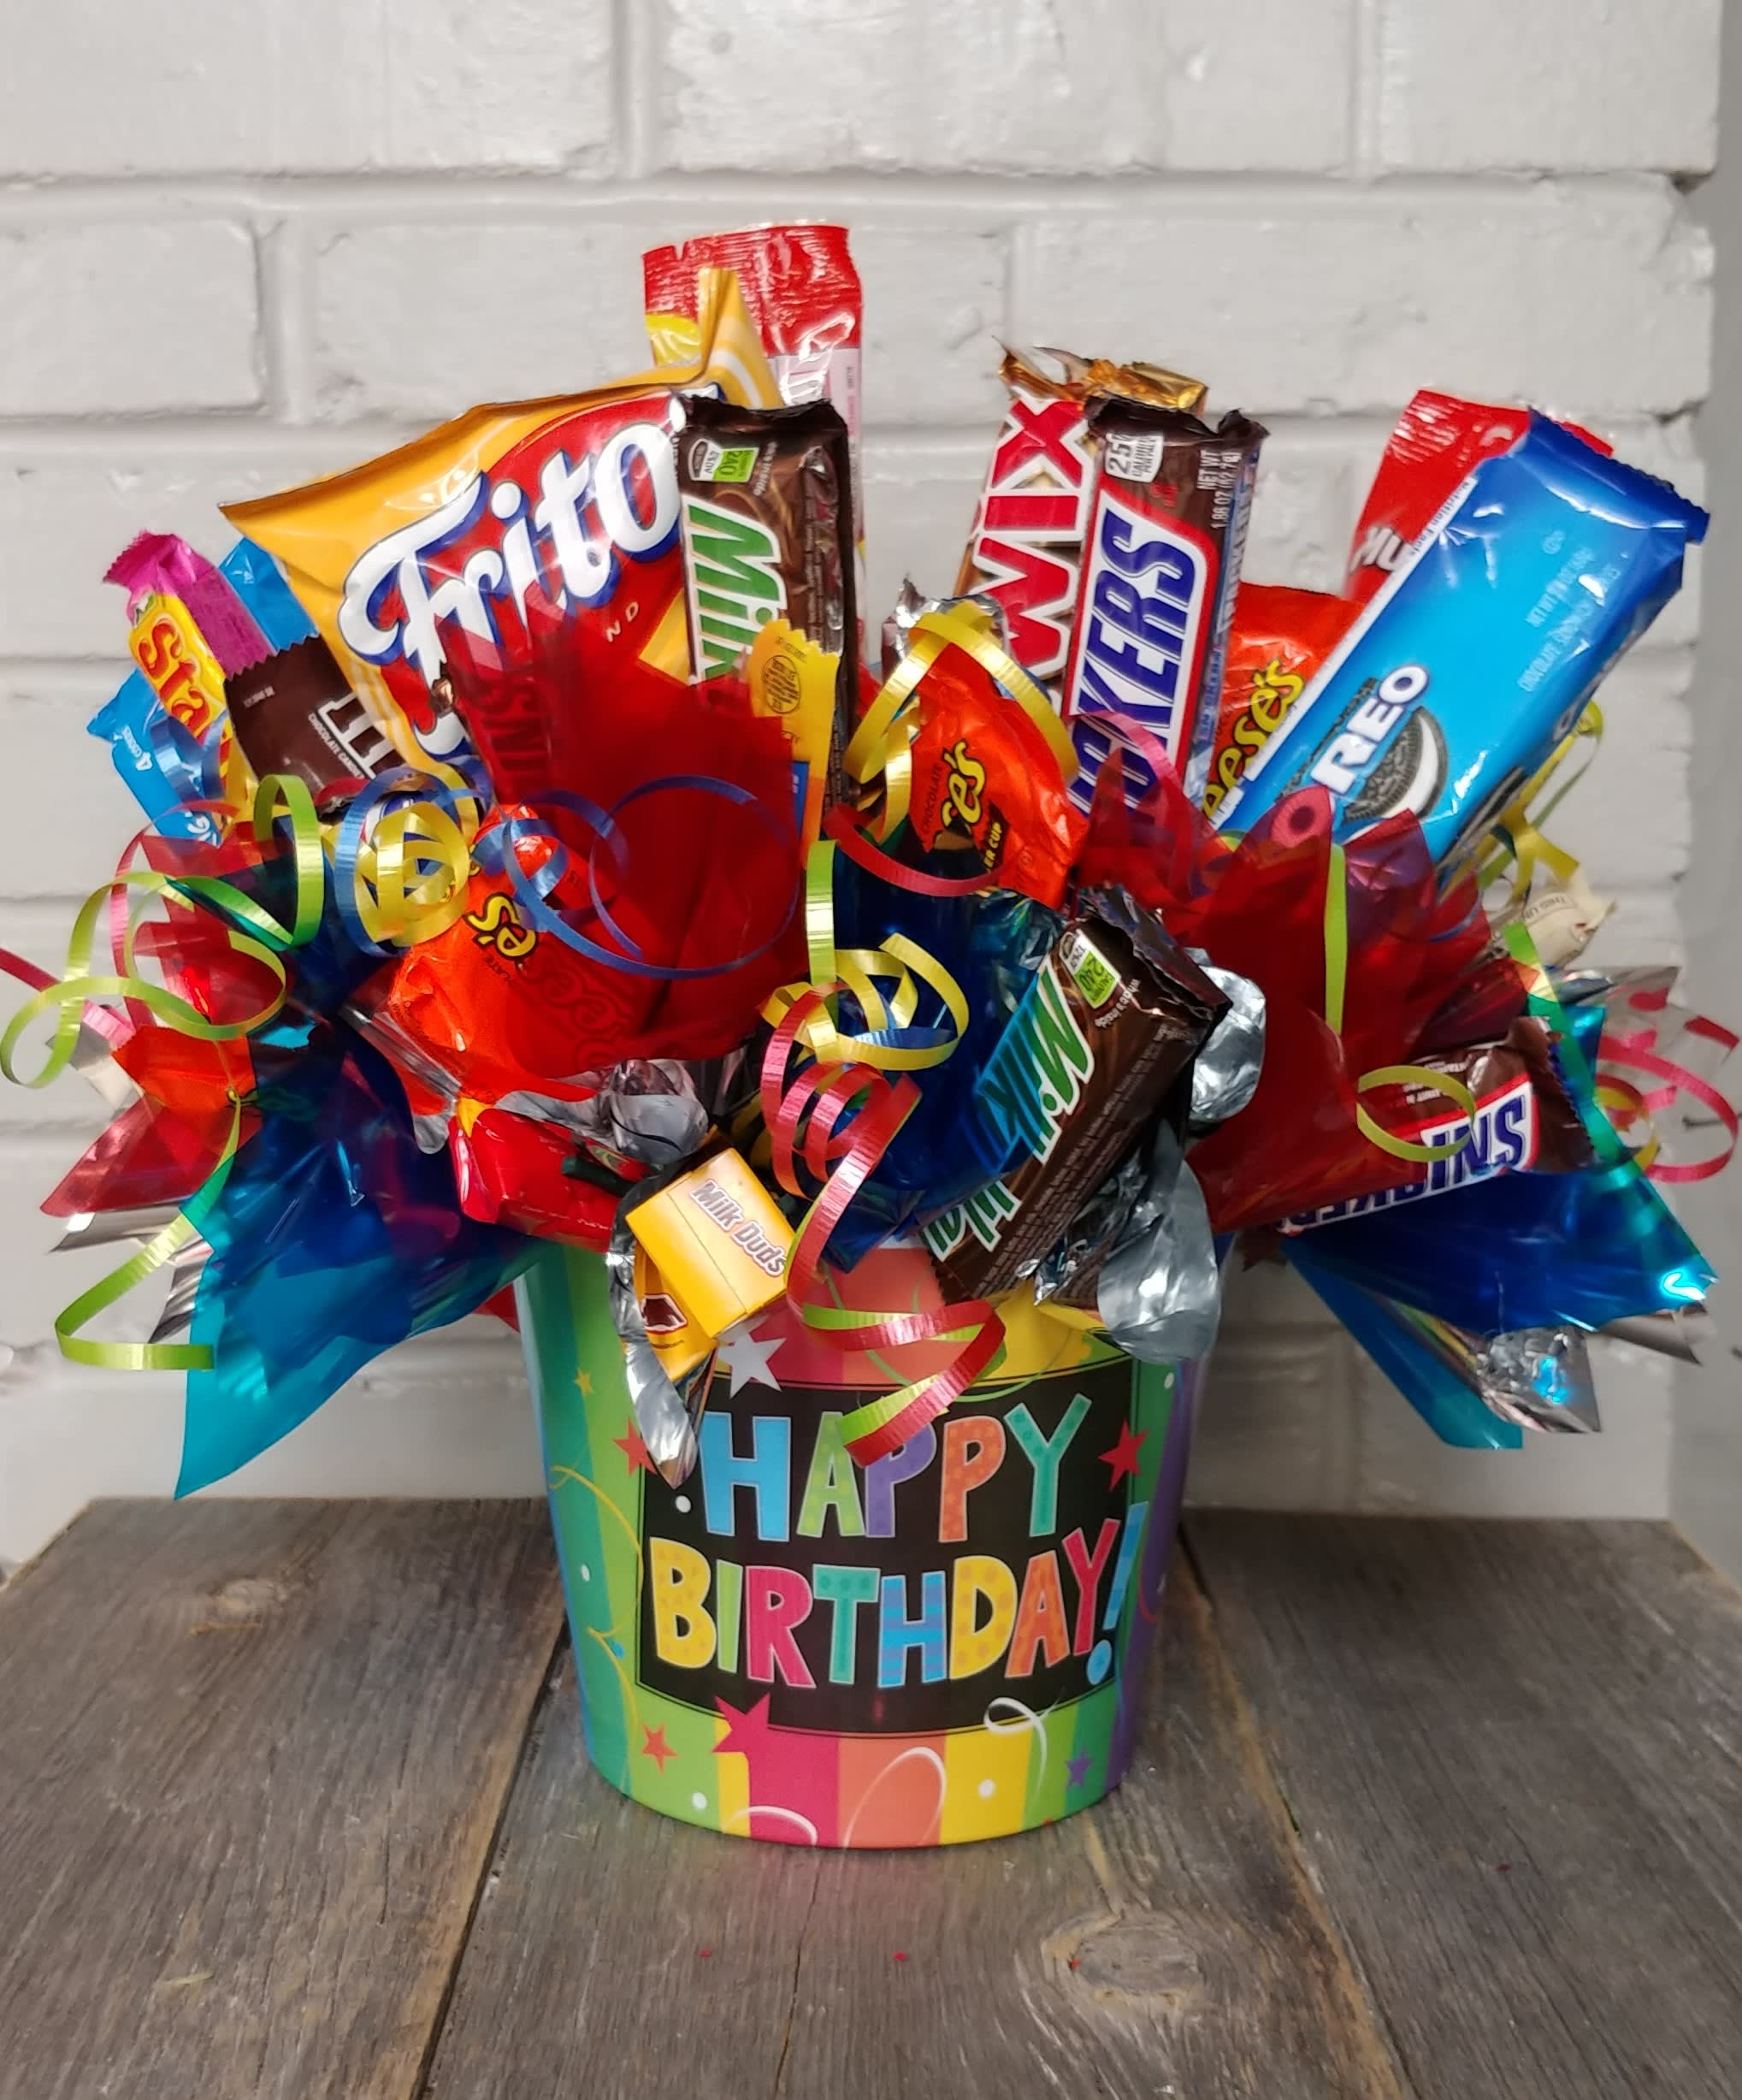 Ultimate Birthday Wishes - Large birthday container filled with candy and snacks!!!!!